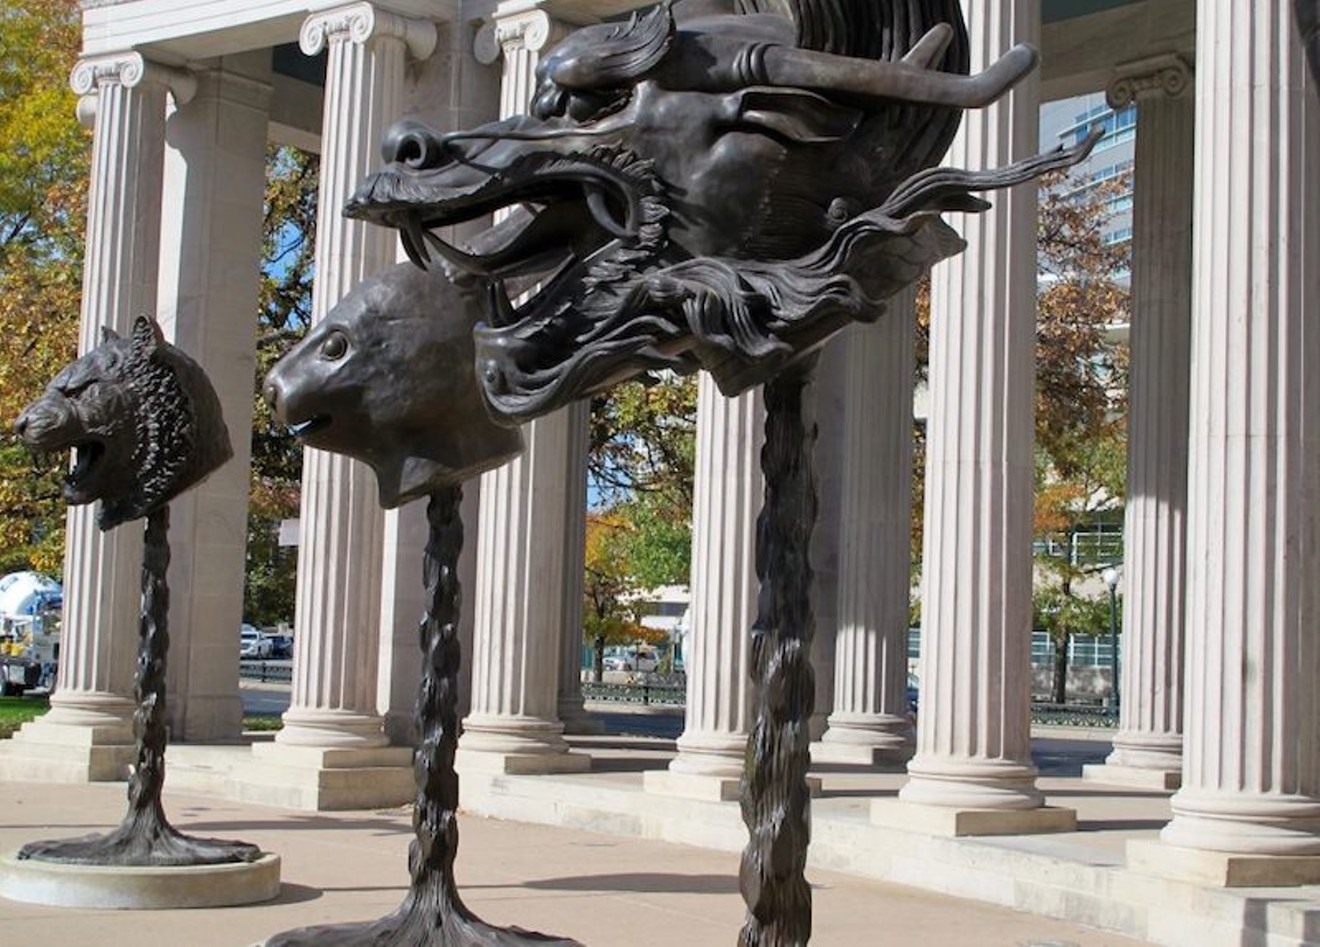 Take a tour of Ai Weiwei's enchanting public art installments on Friday, January 26, at the McNichols Building.